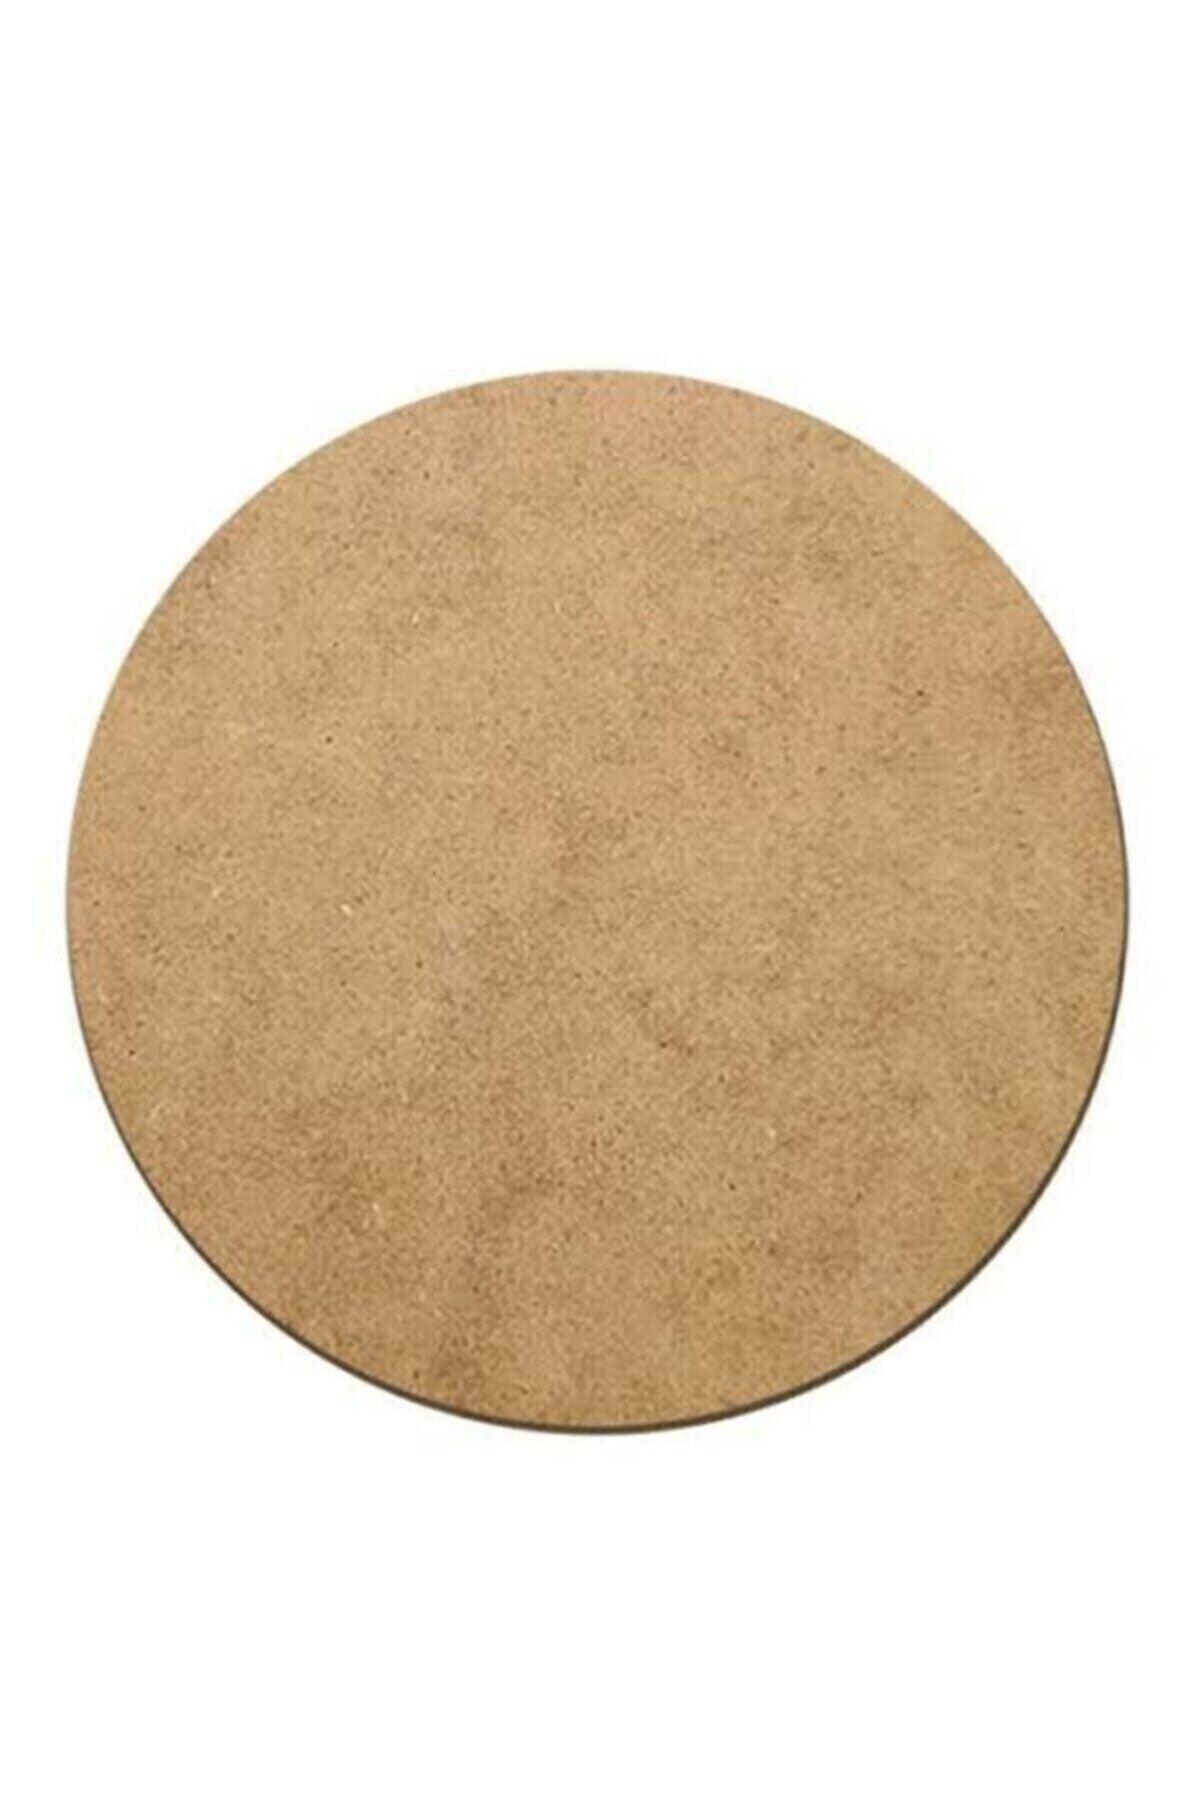 Supla Plate 12 Pieces 3 Mm Raw Mdf 33 Cm Diameter Round Serving Subplate - Swordslife